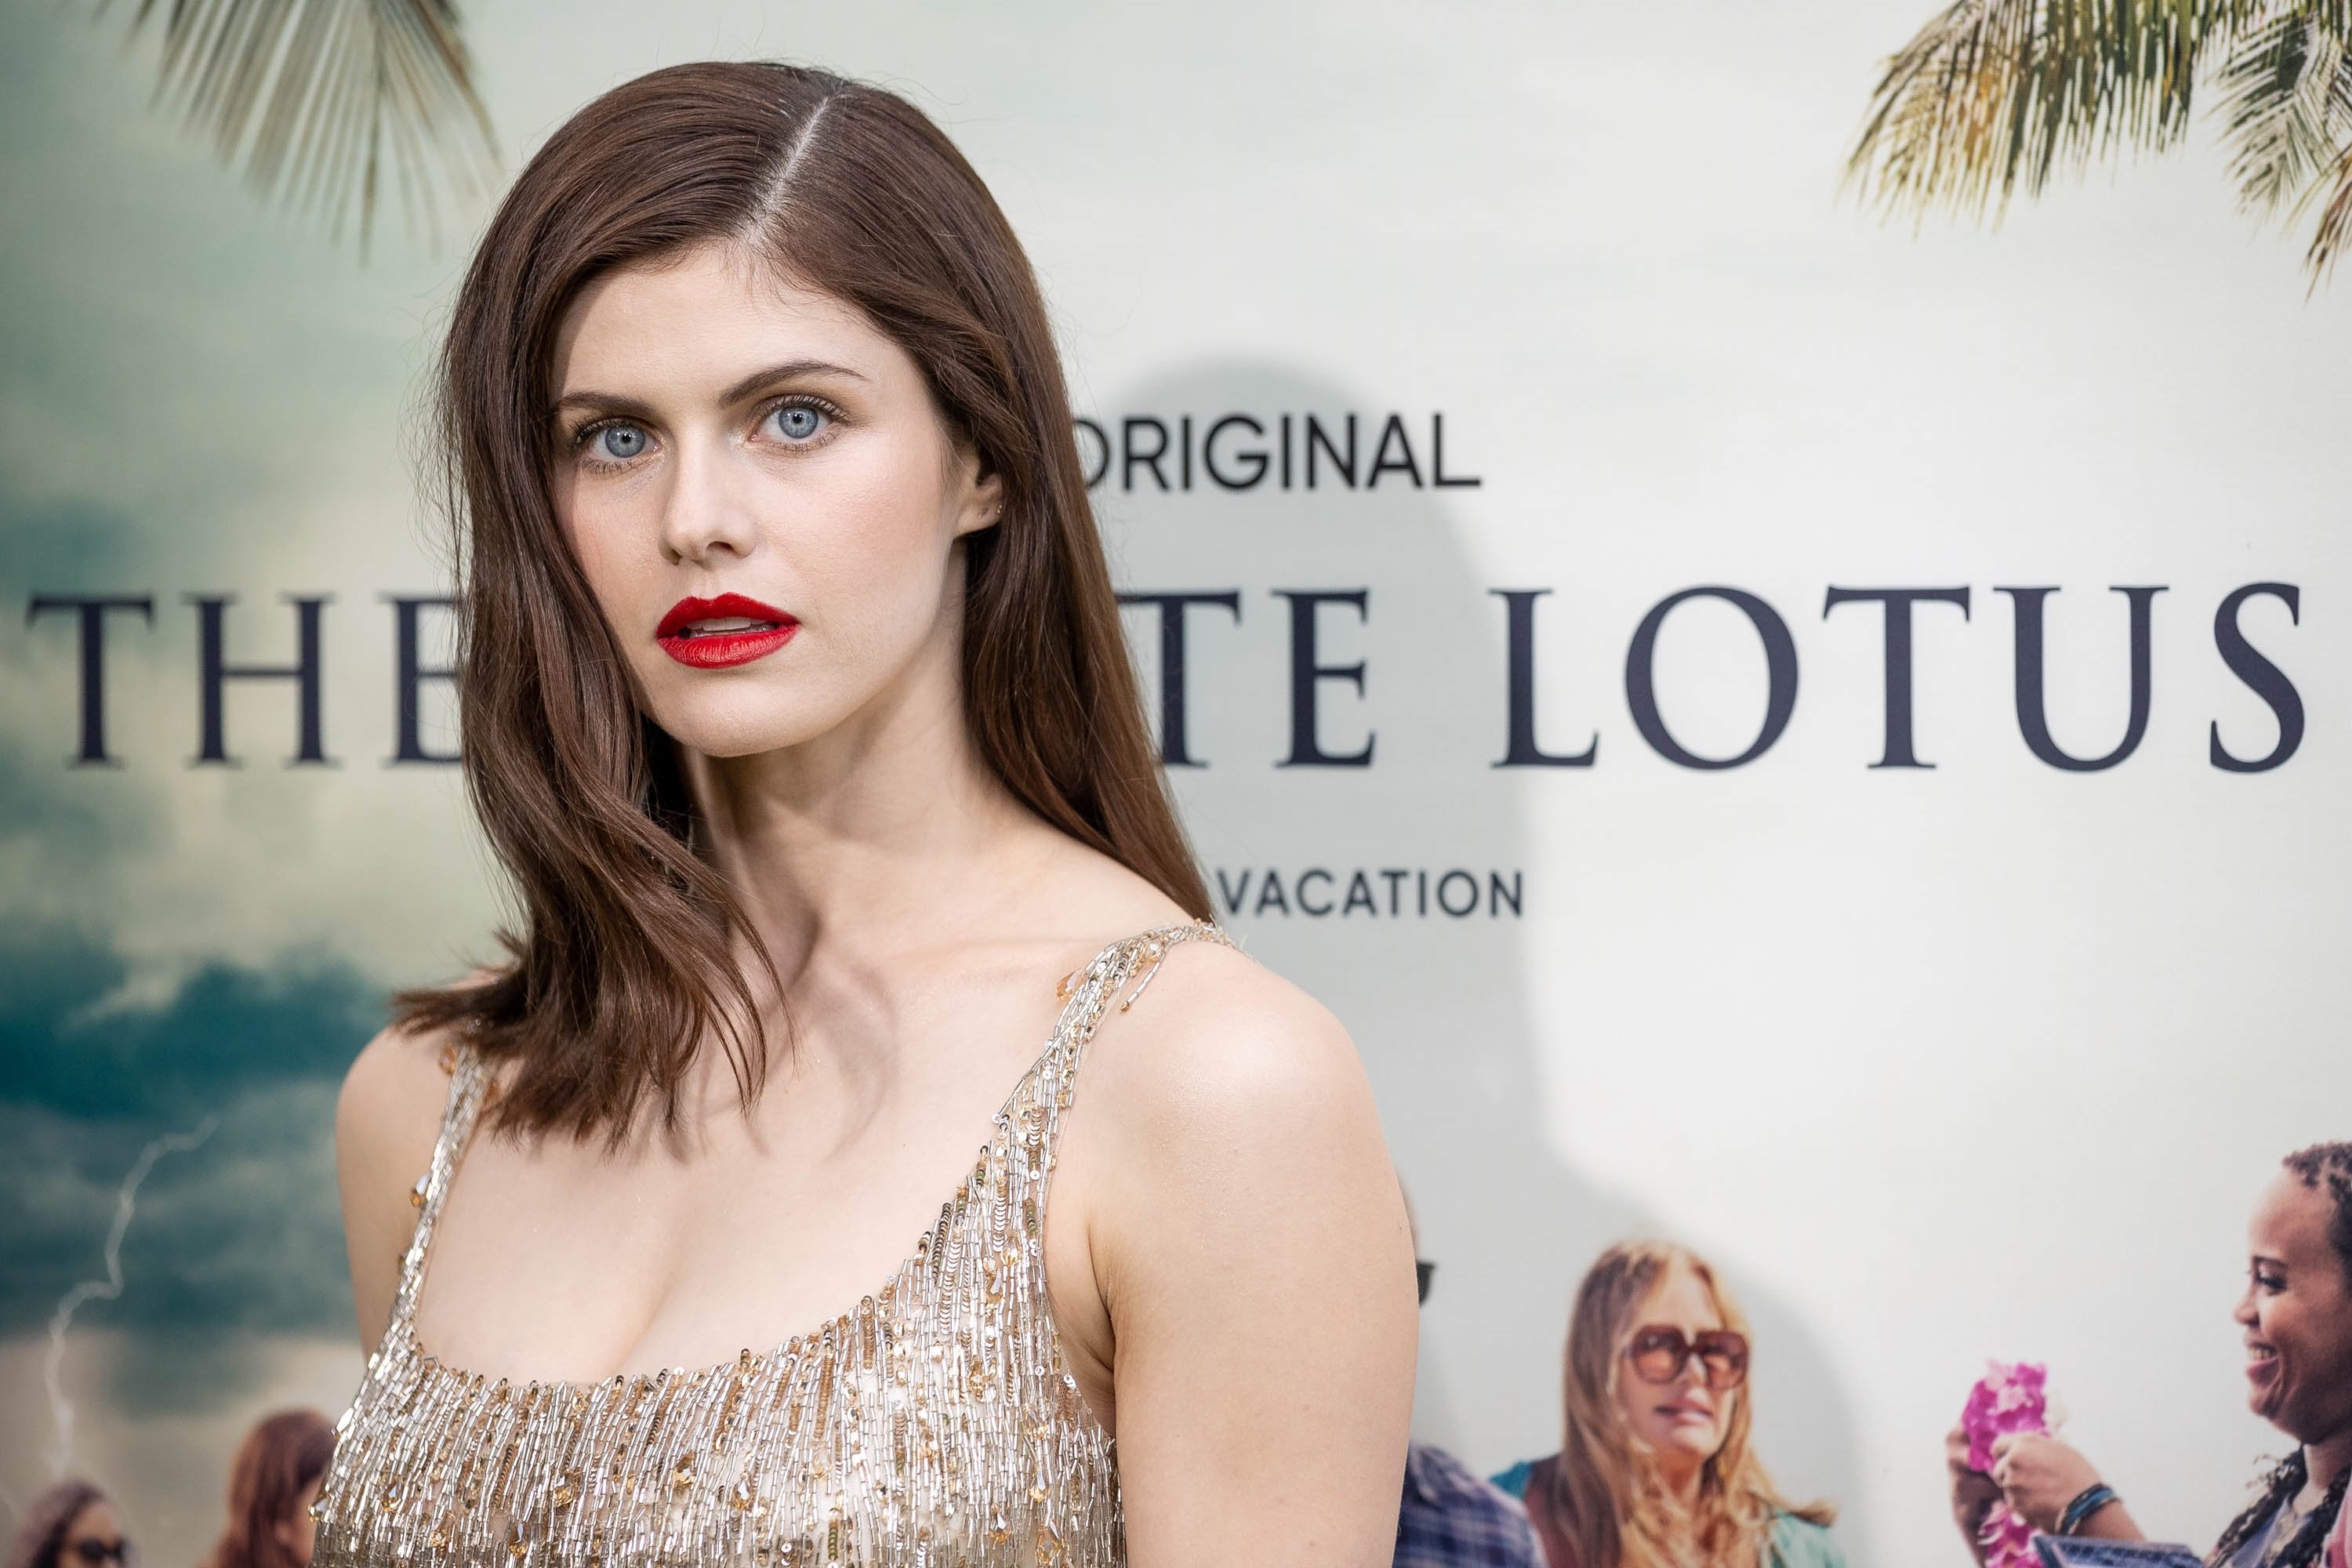 The White Lotus cast member Alexandra Daddario posing for the premiere as fans guess if she was the one who dies in the HBO series